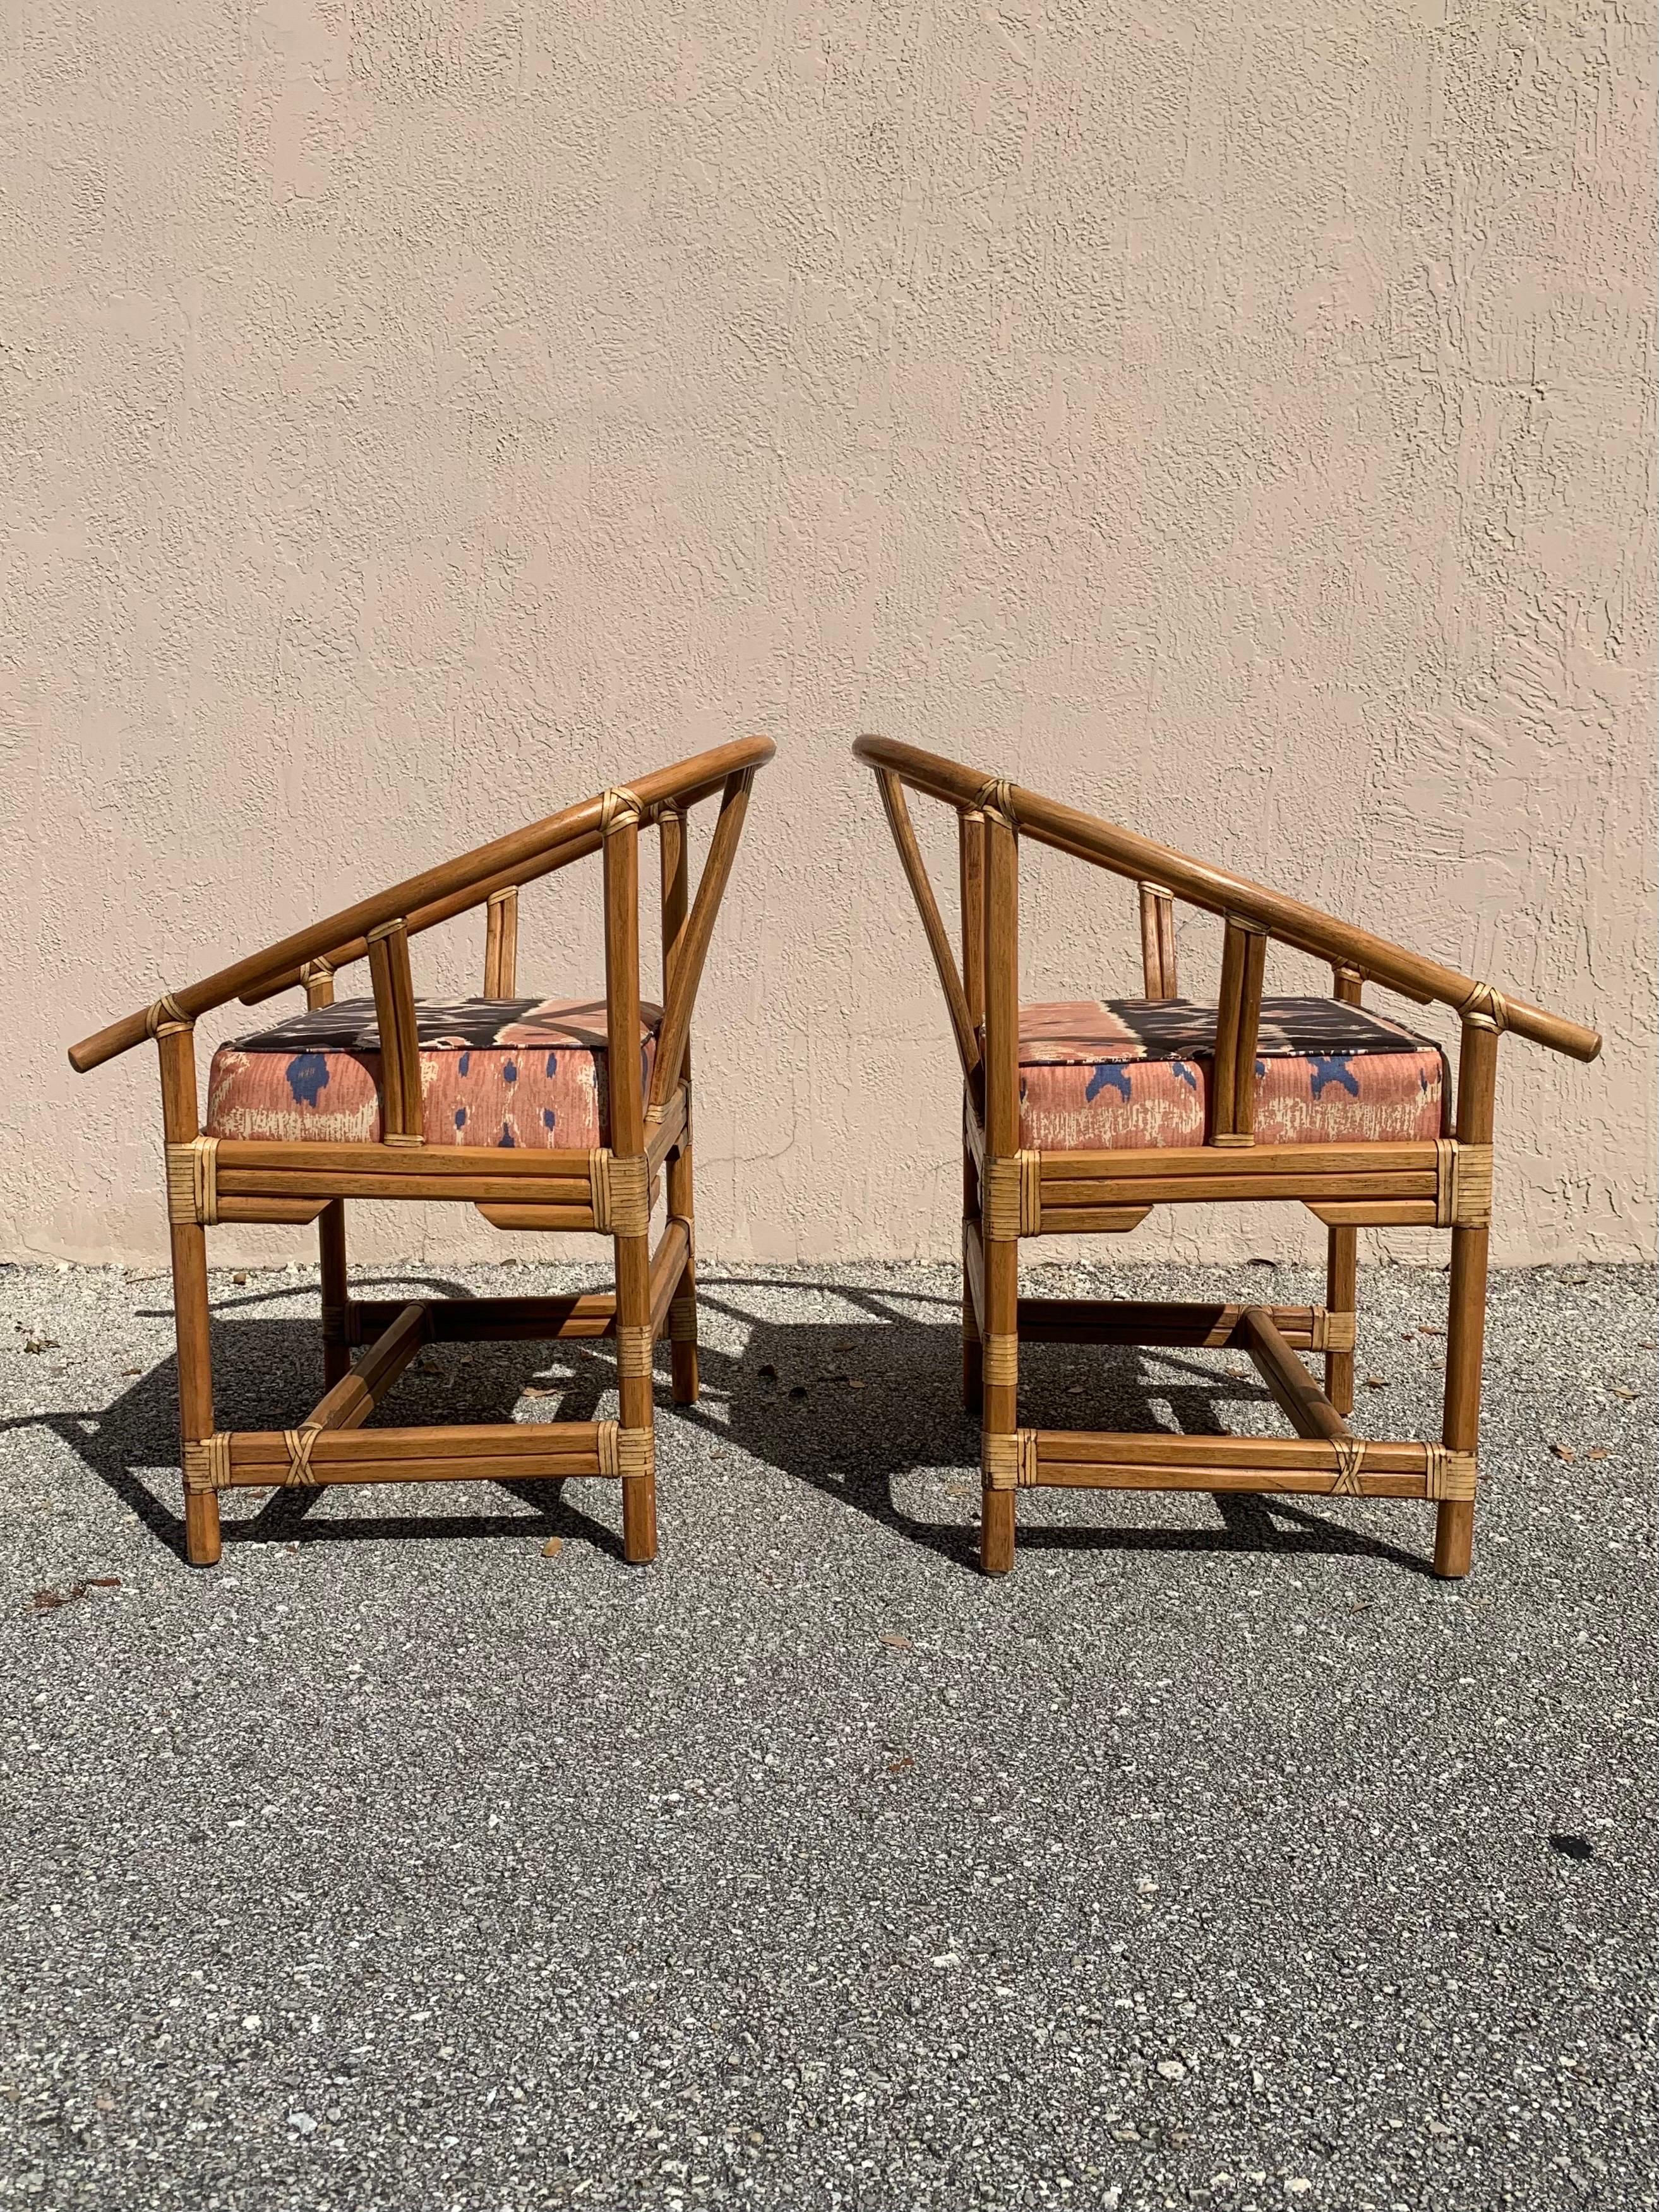 Vintage Organic Modern Chairs by Ficks Reed In Good Condition For Sale In Boynton Beach, FL